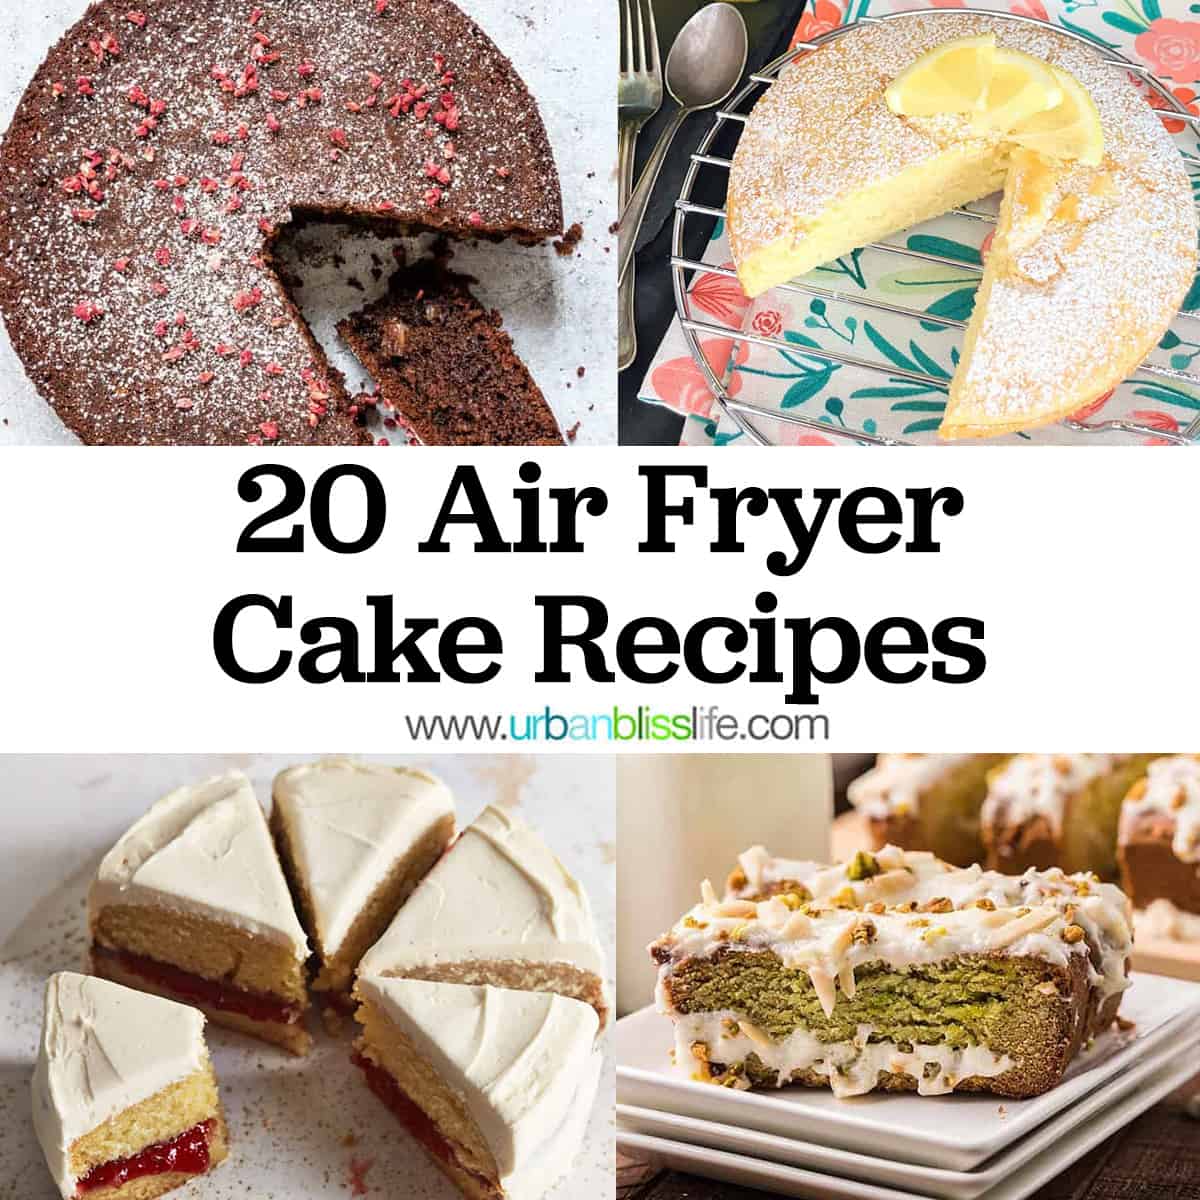 chocolate cake lemon cake, raspberry cake, and matcha cake with title text that reads "20 Air Fryer Cake Recipes."